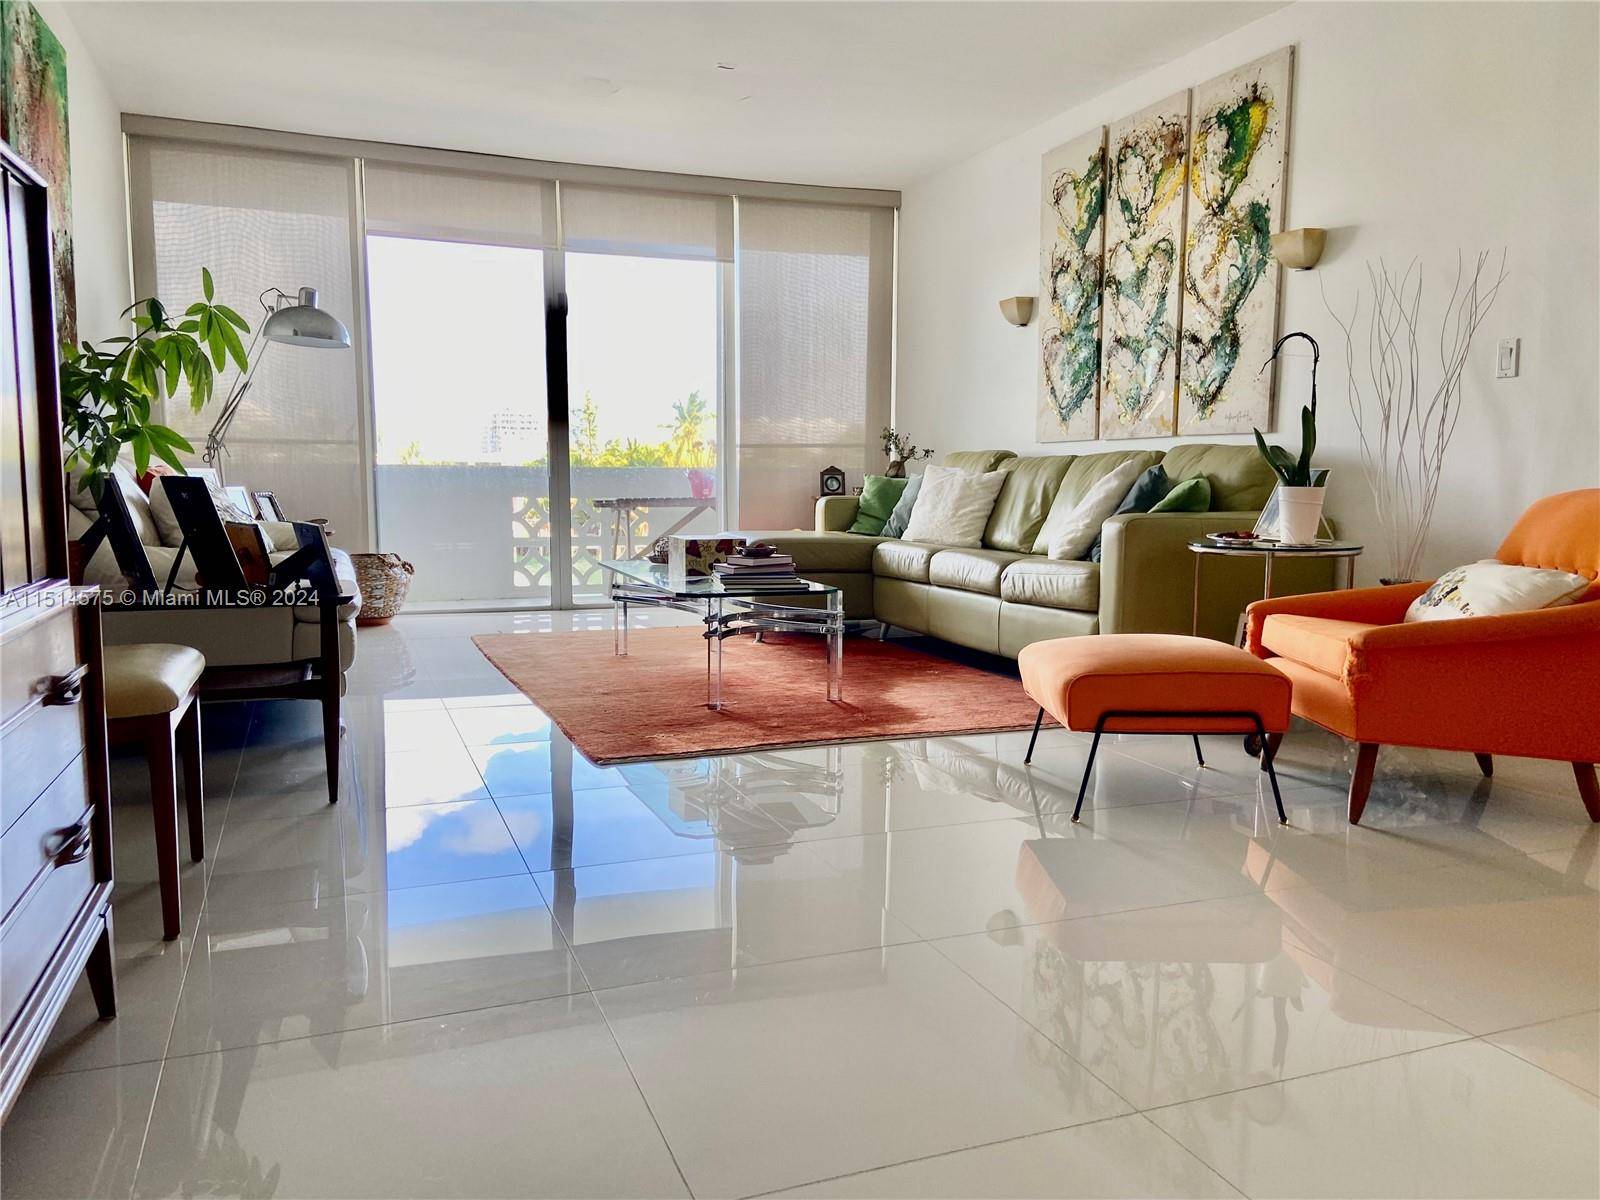 Unobstructed water views from every room in this updated 2 2 corner unit, considered the best line in the building, with an oversize balcony with privacy panel.